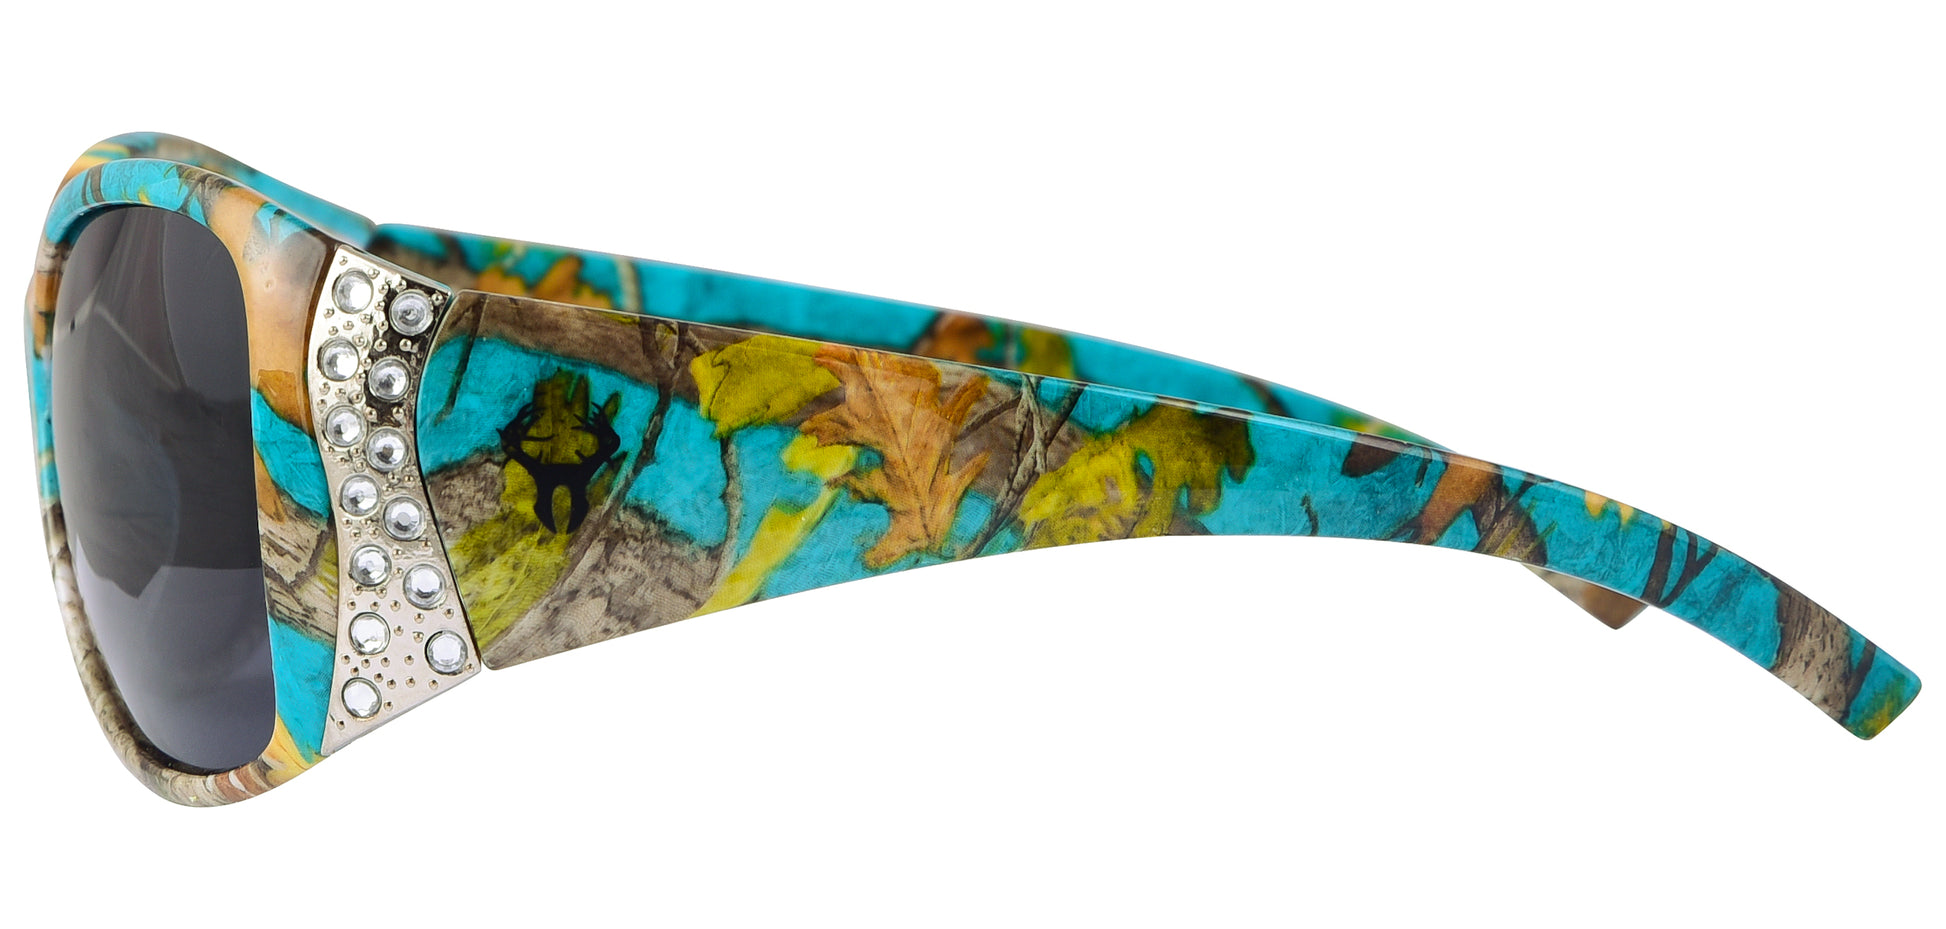 Second image: Hornz Teal Camouflage Polarized Sunglasses Country Girl Style Camo & Free Matching Microfiber Pouch – Teal Camo Frame - Smoke Lens